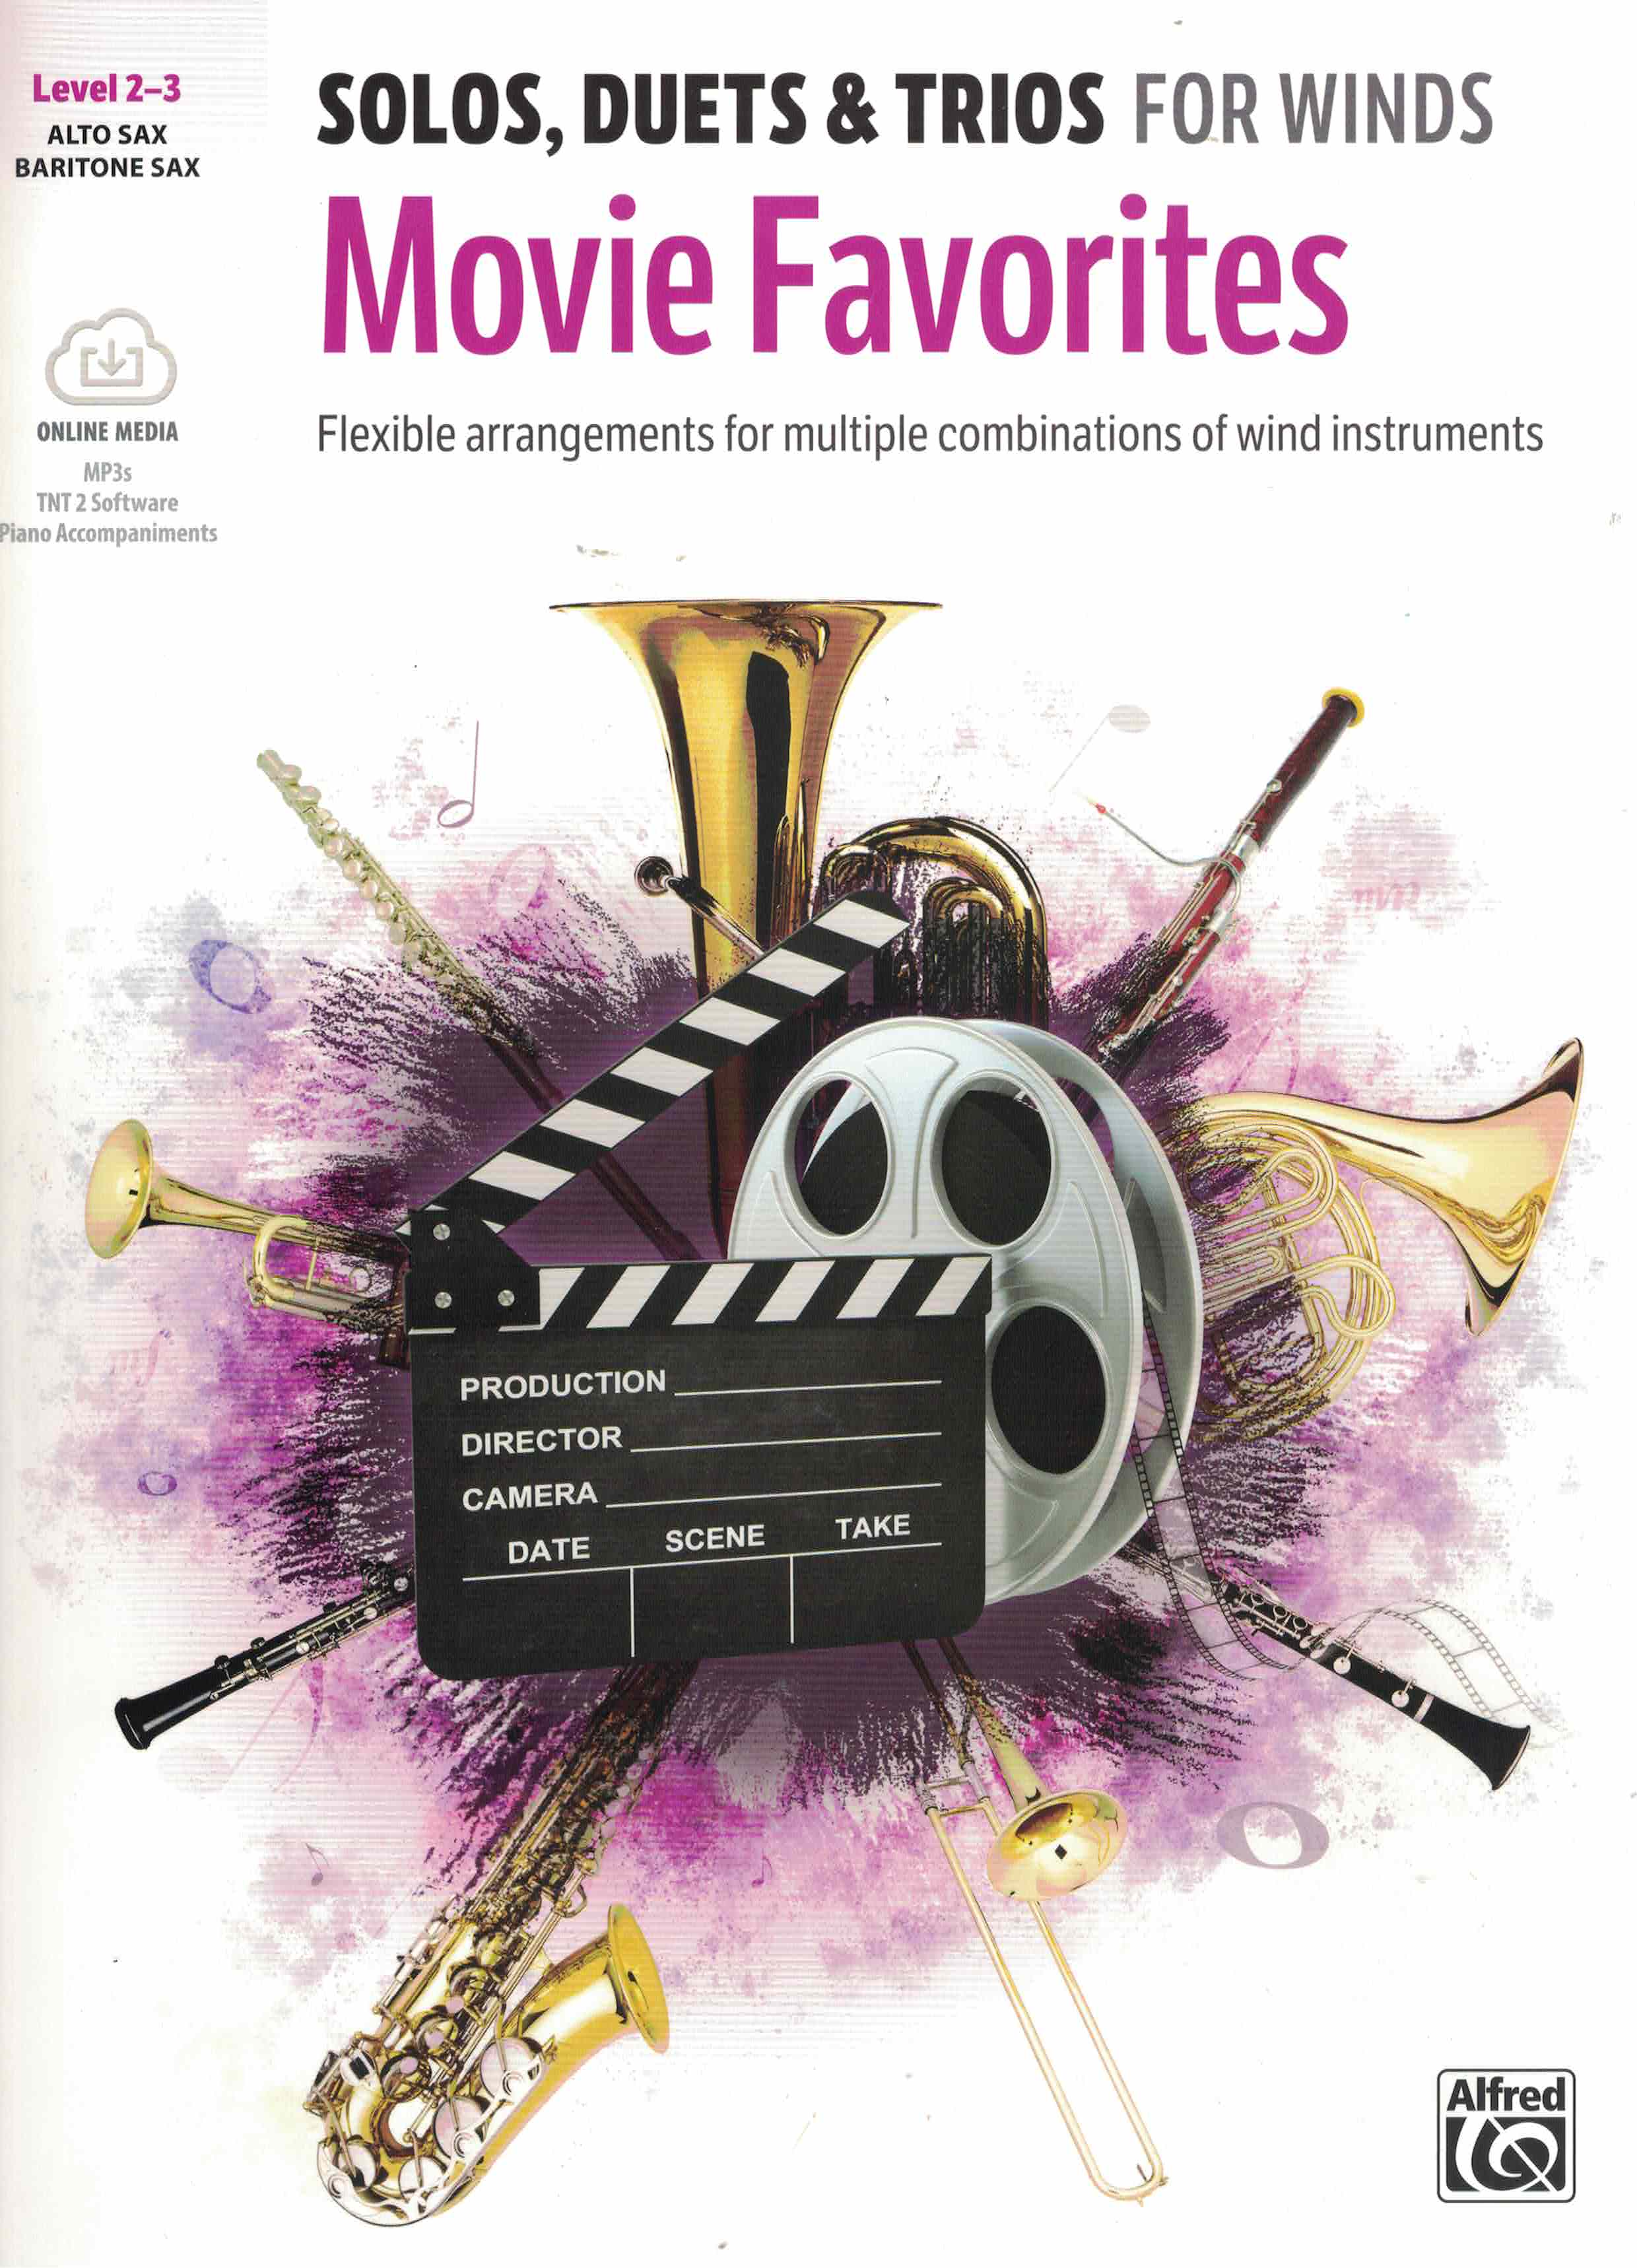 Movie Favorites for winds, 1-3 Asax